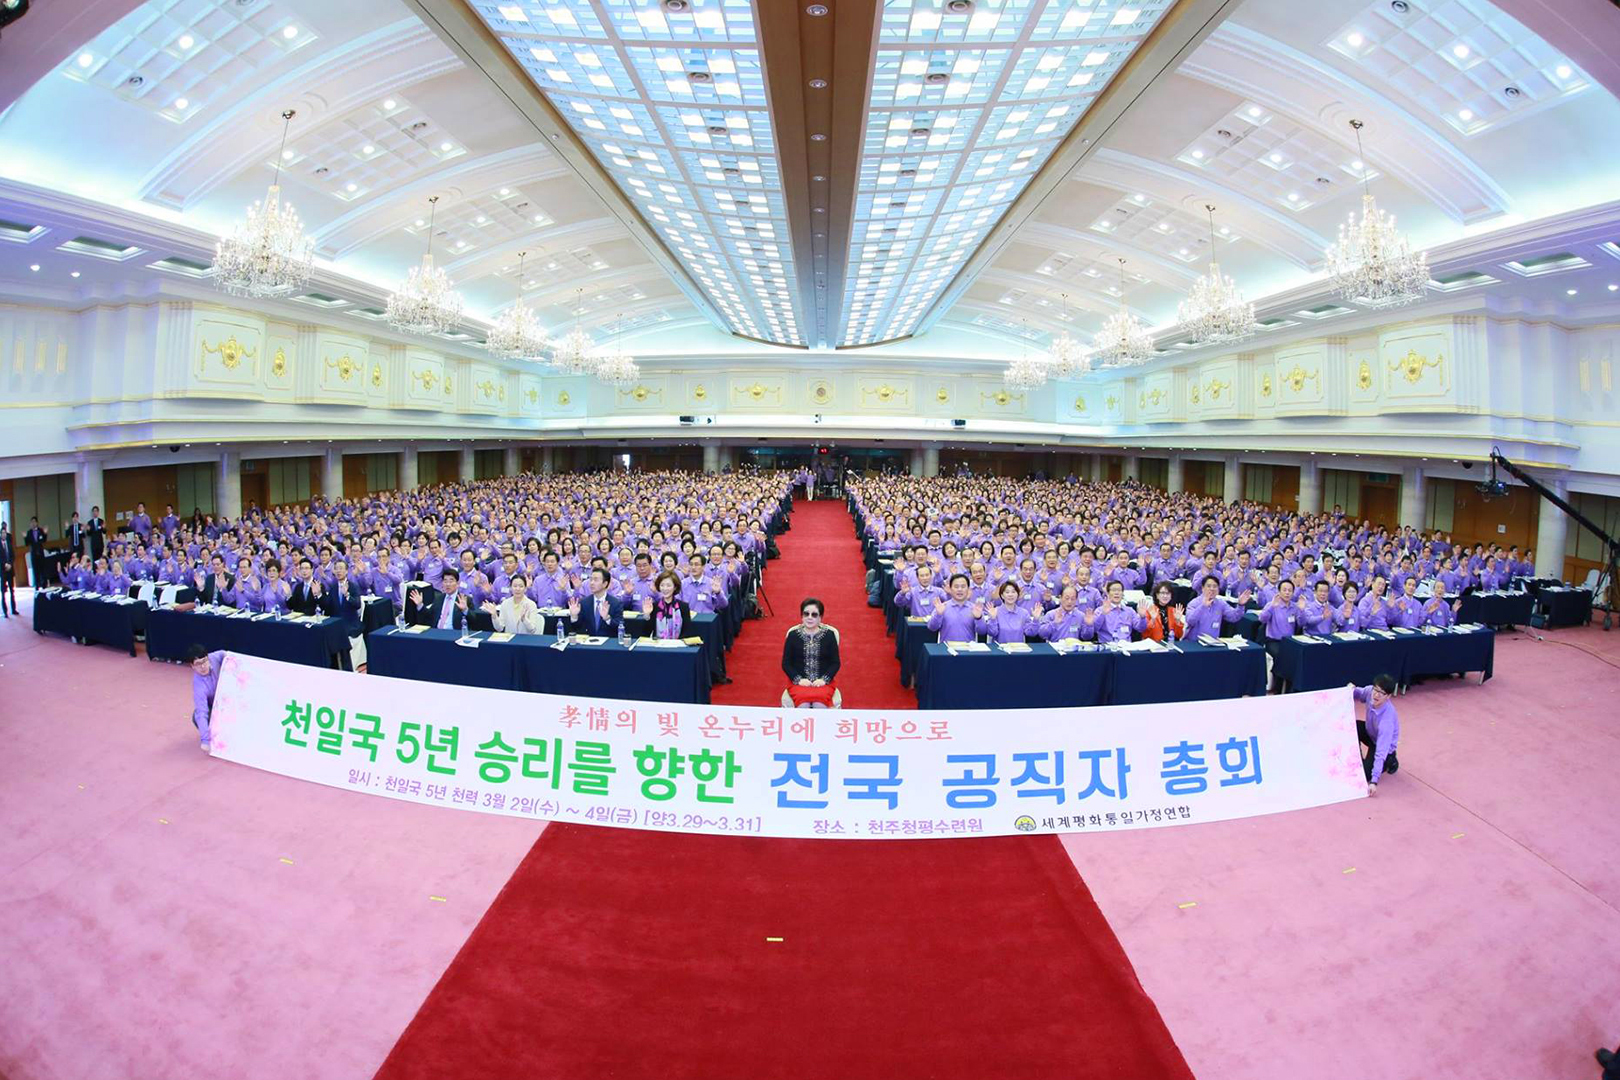 National Pastors Assembly for the Victory of the Fifth Year of Cheon Il Guk (March 29, Cheongpyeong)